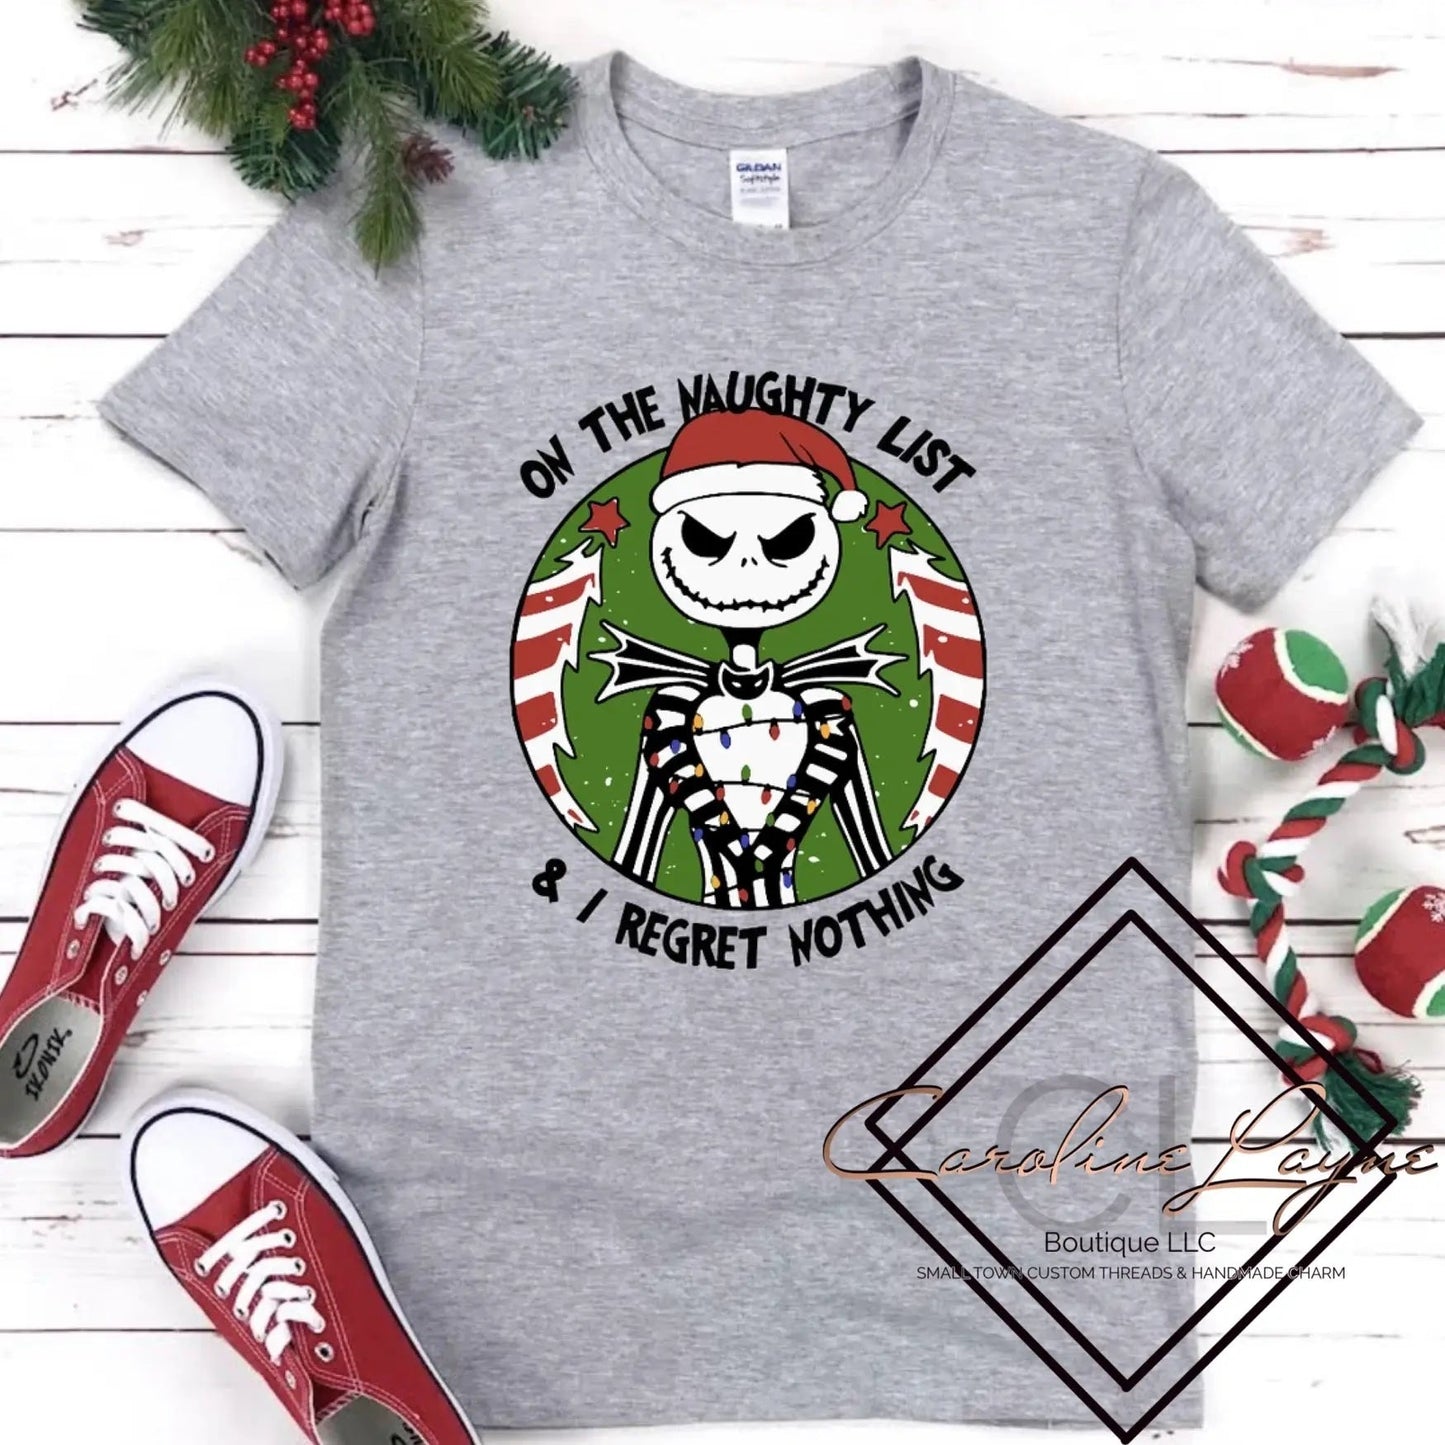 On The Naughty List And I Regret Nothing Tee - Caroline Layne Boutique LLC